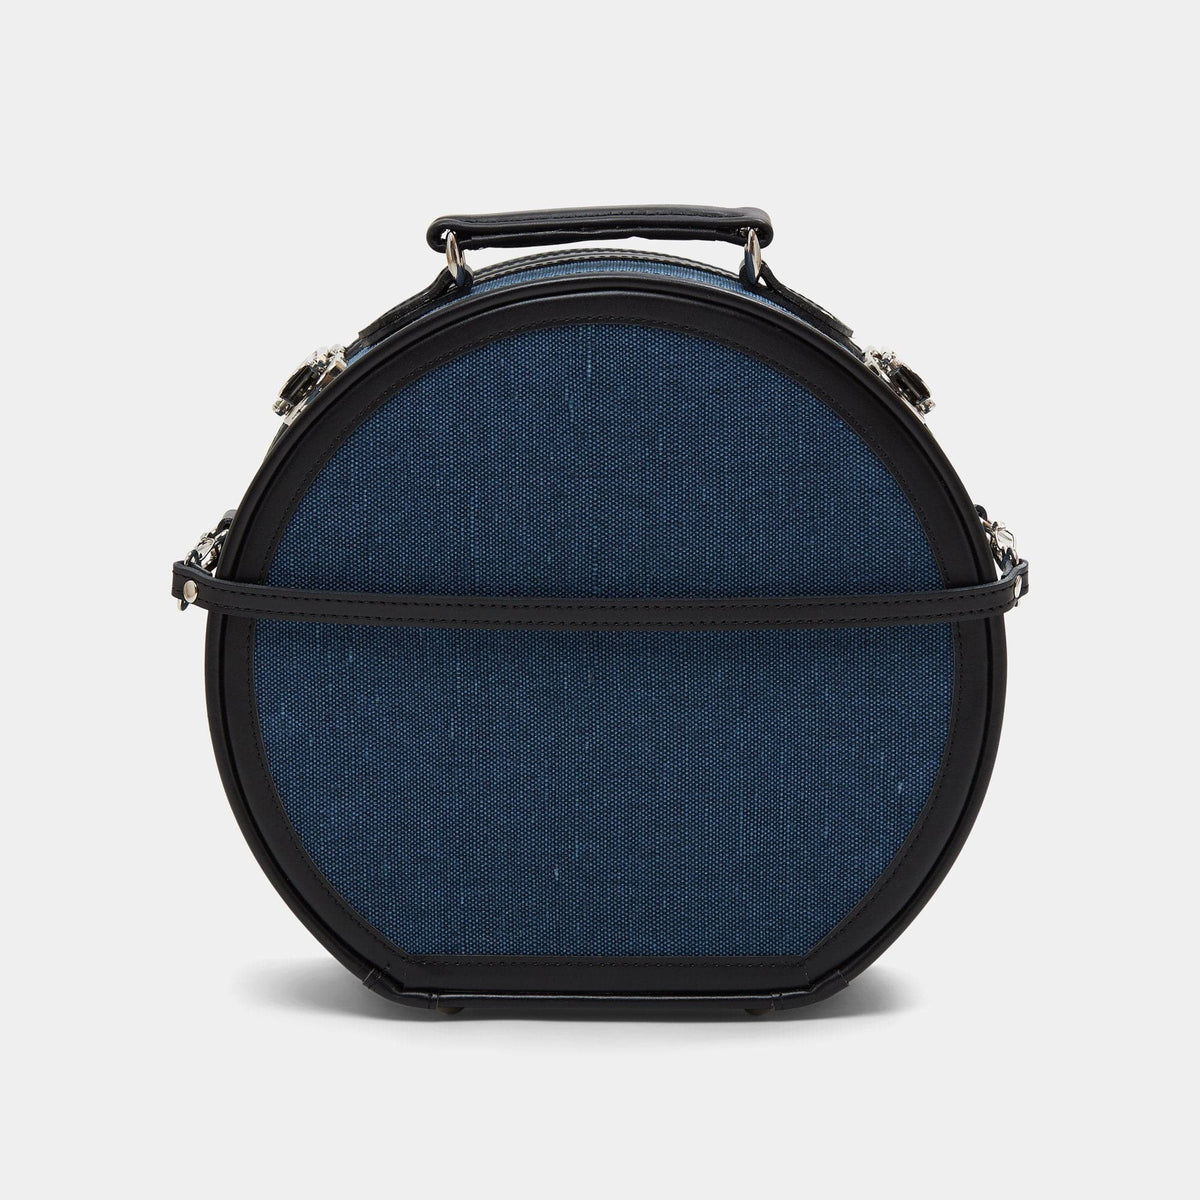 The Editor - Navy Hatbox Small Hatbox Small Steamline Luggage 